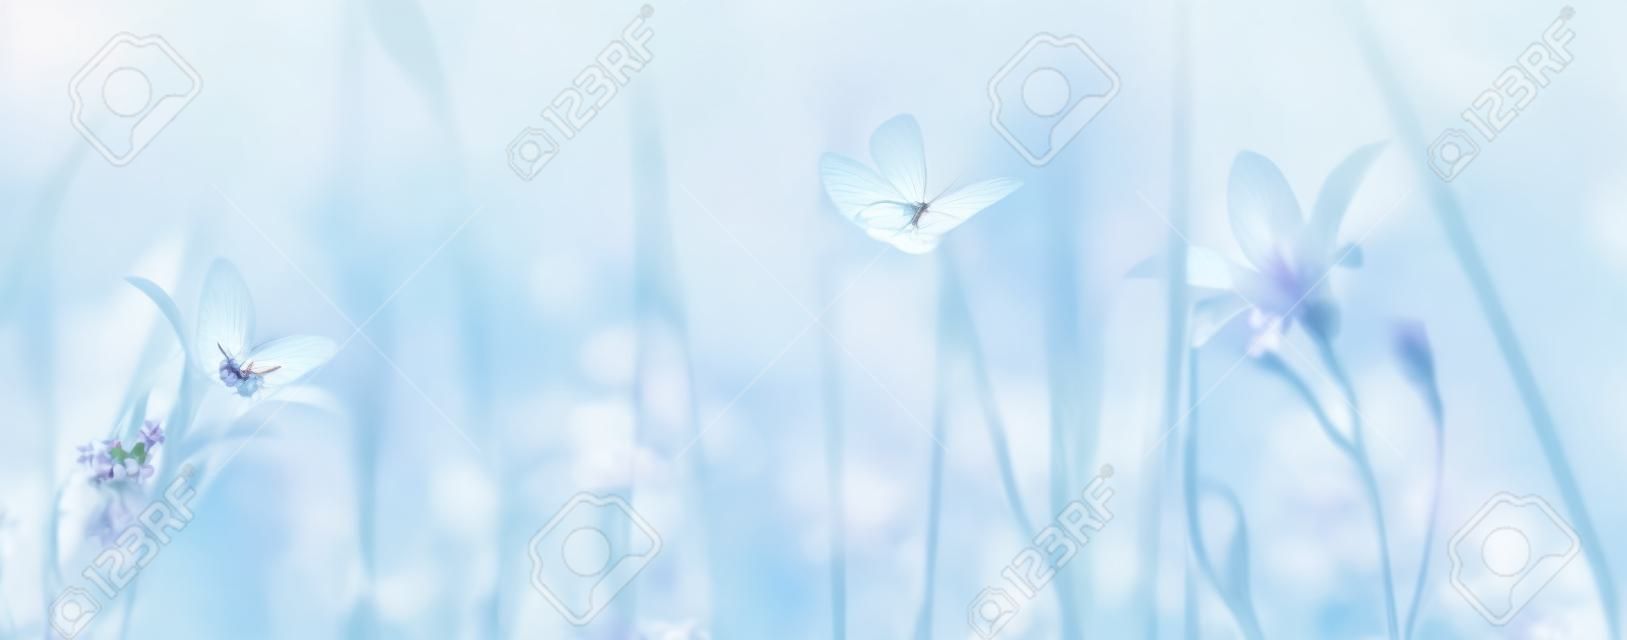 Dreamy spring bellflowers bloom, butterfly close-up, sunlight panorama. Spring floral mixed media art. Delicate delightful romantic artistic toned image. Pastel blue pink toned. Macro with soft focus. Nature greeting card background.